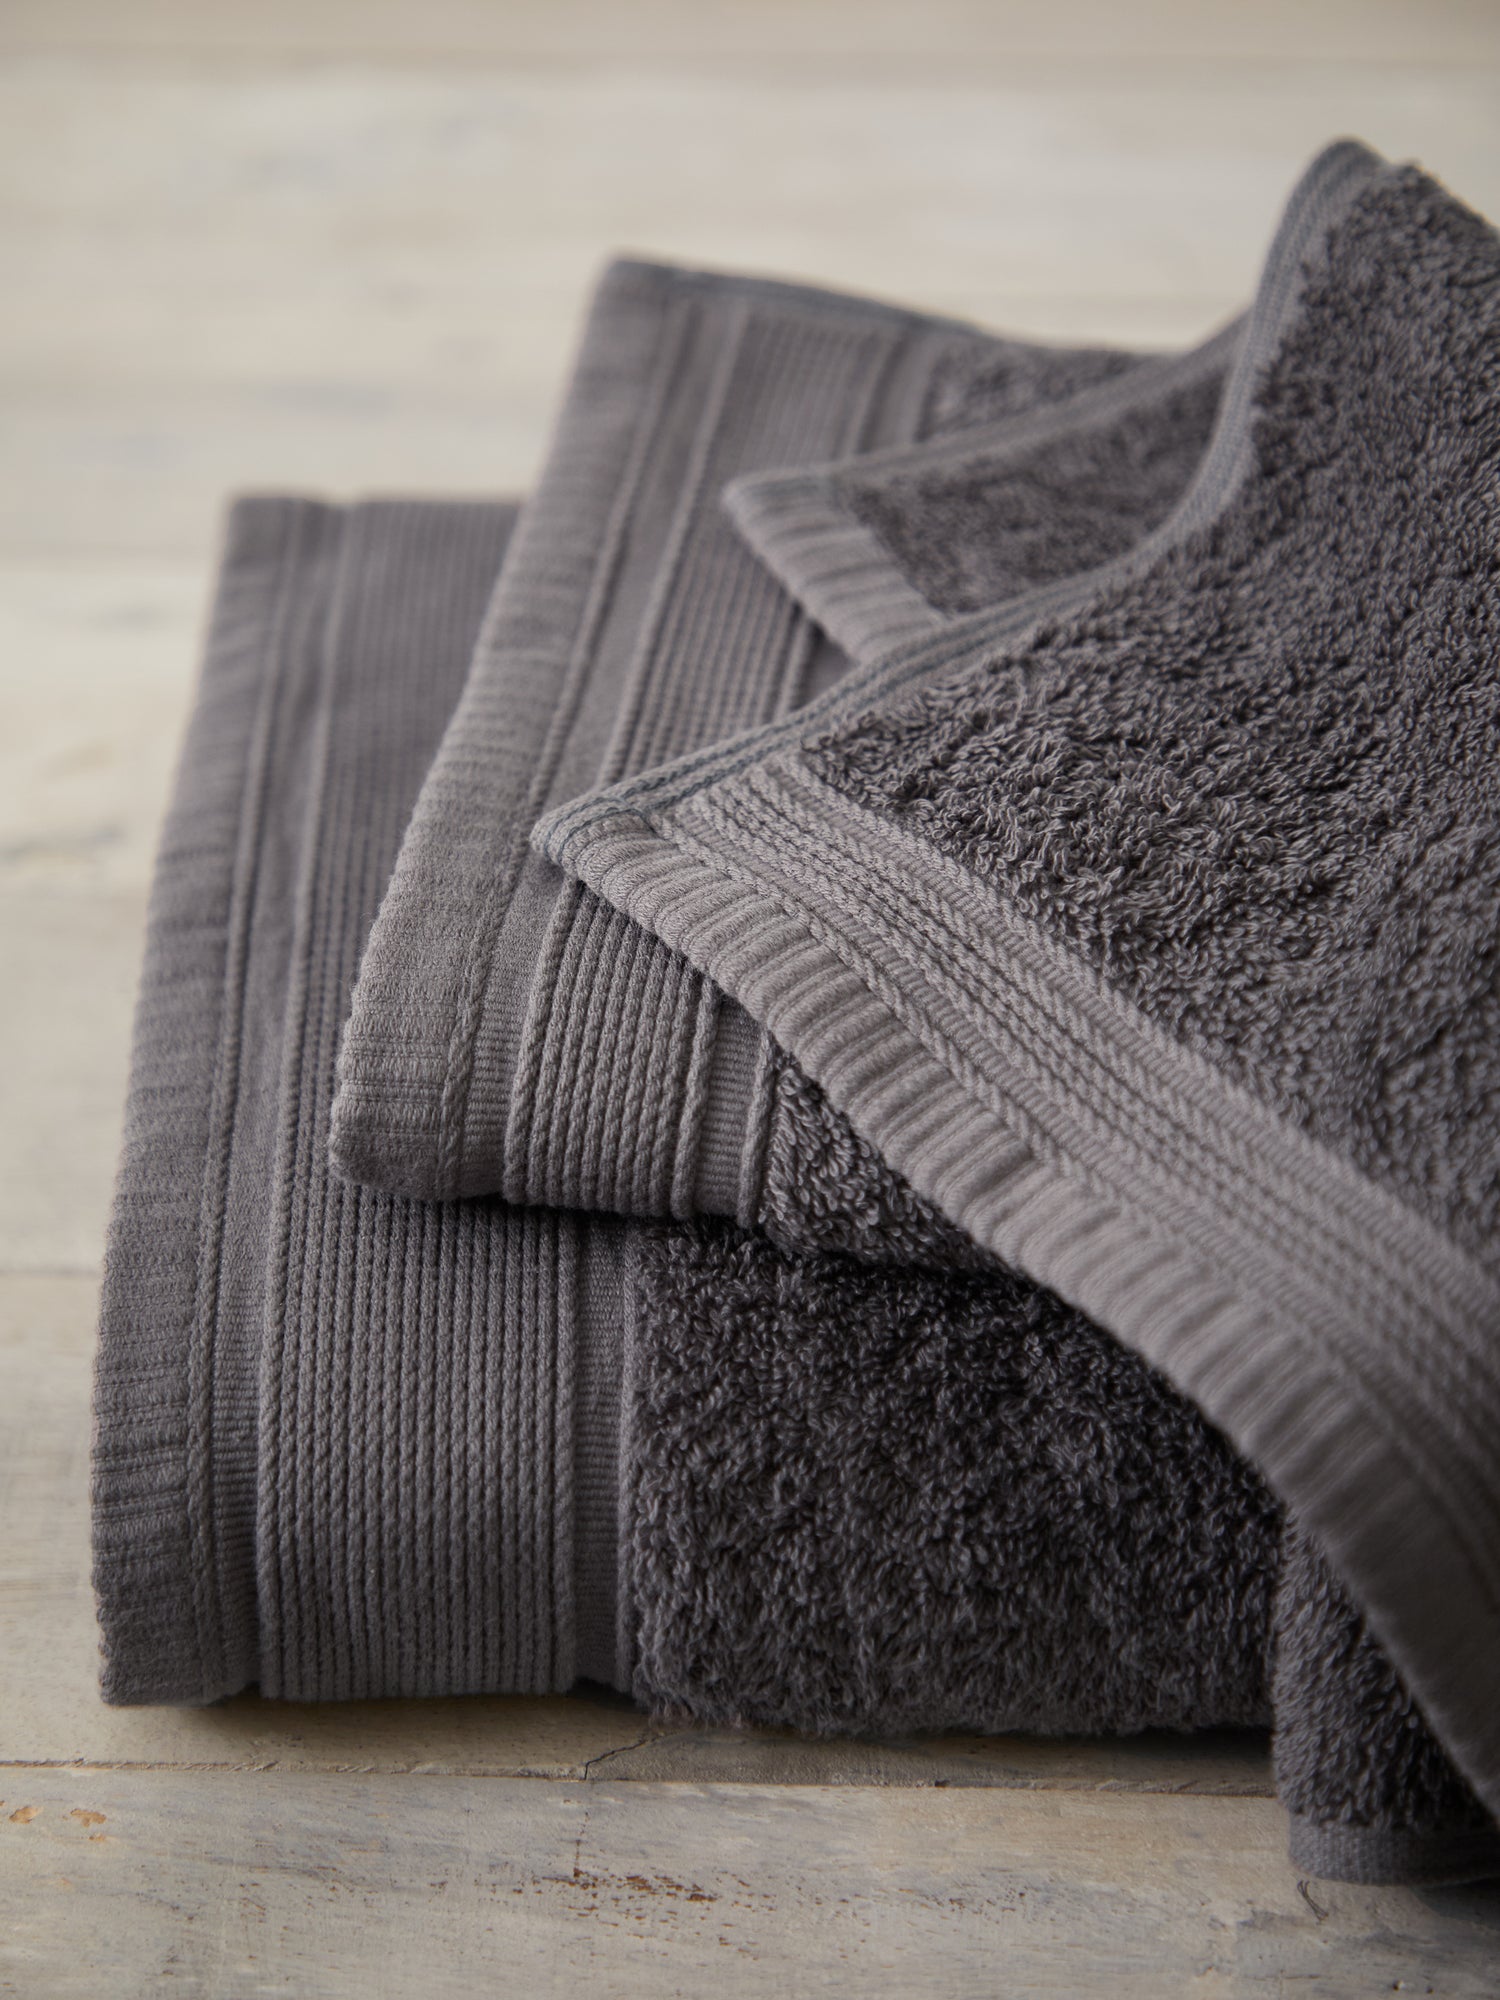 https://www.wallacecotton.com/content/products/oasis-bath-towel-charcoal-3-4435.jpg?width=1500